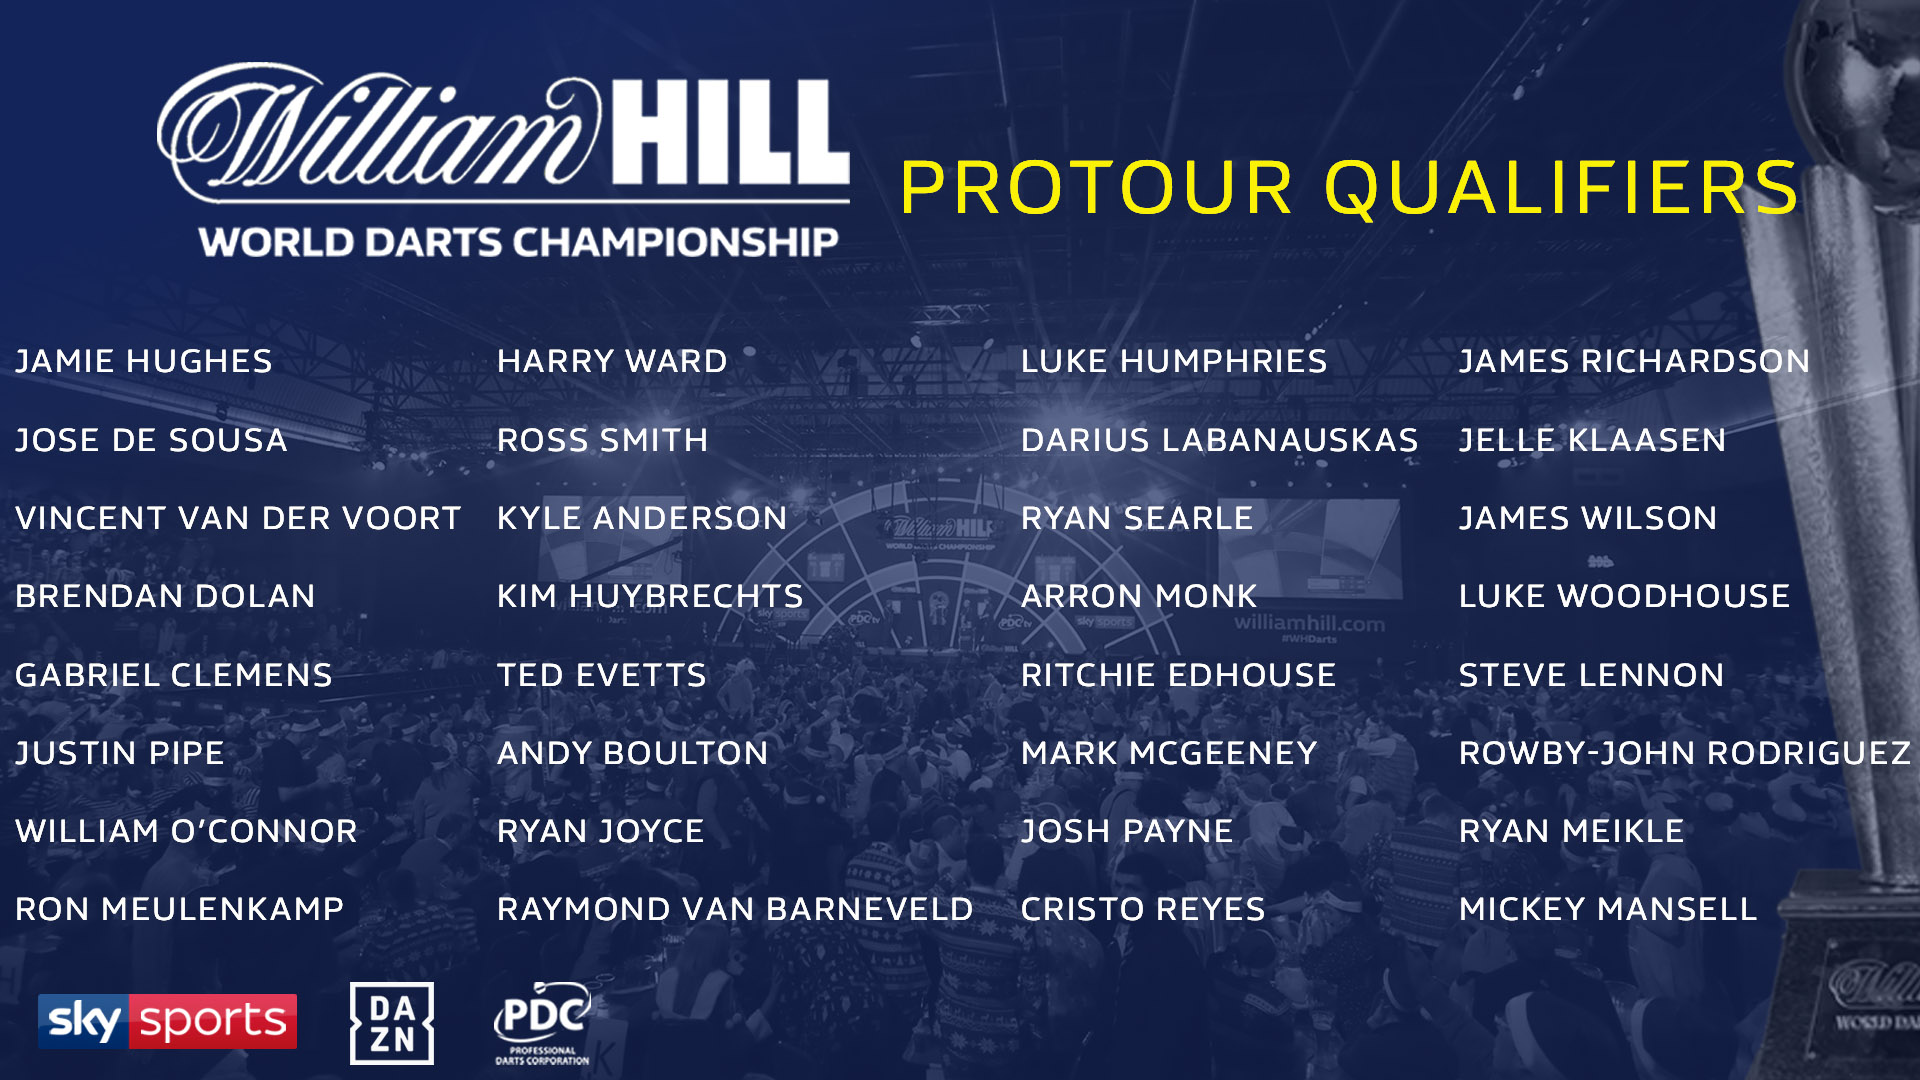 World Championship ProTour Order of Merit qualifiers (PDC)